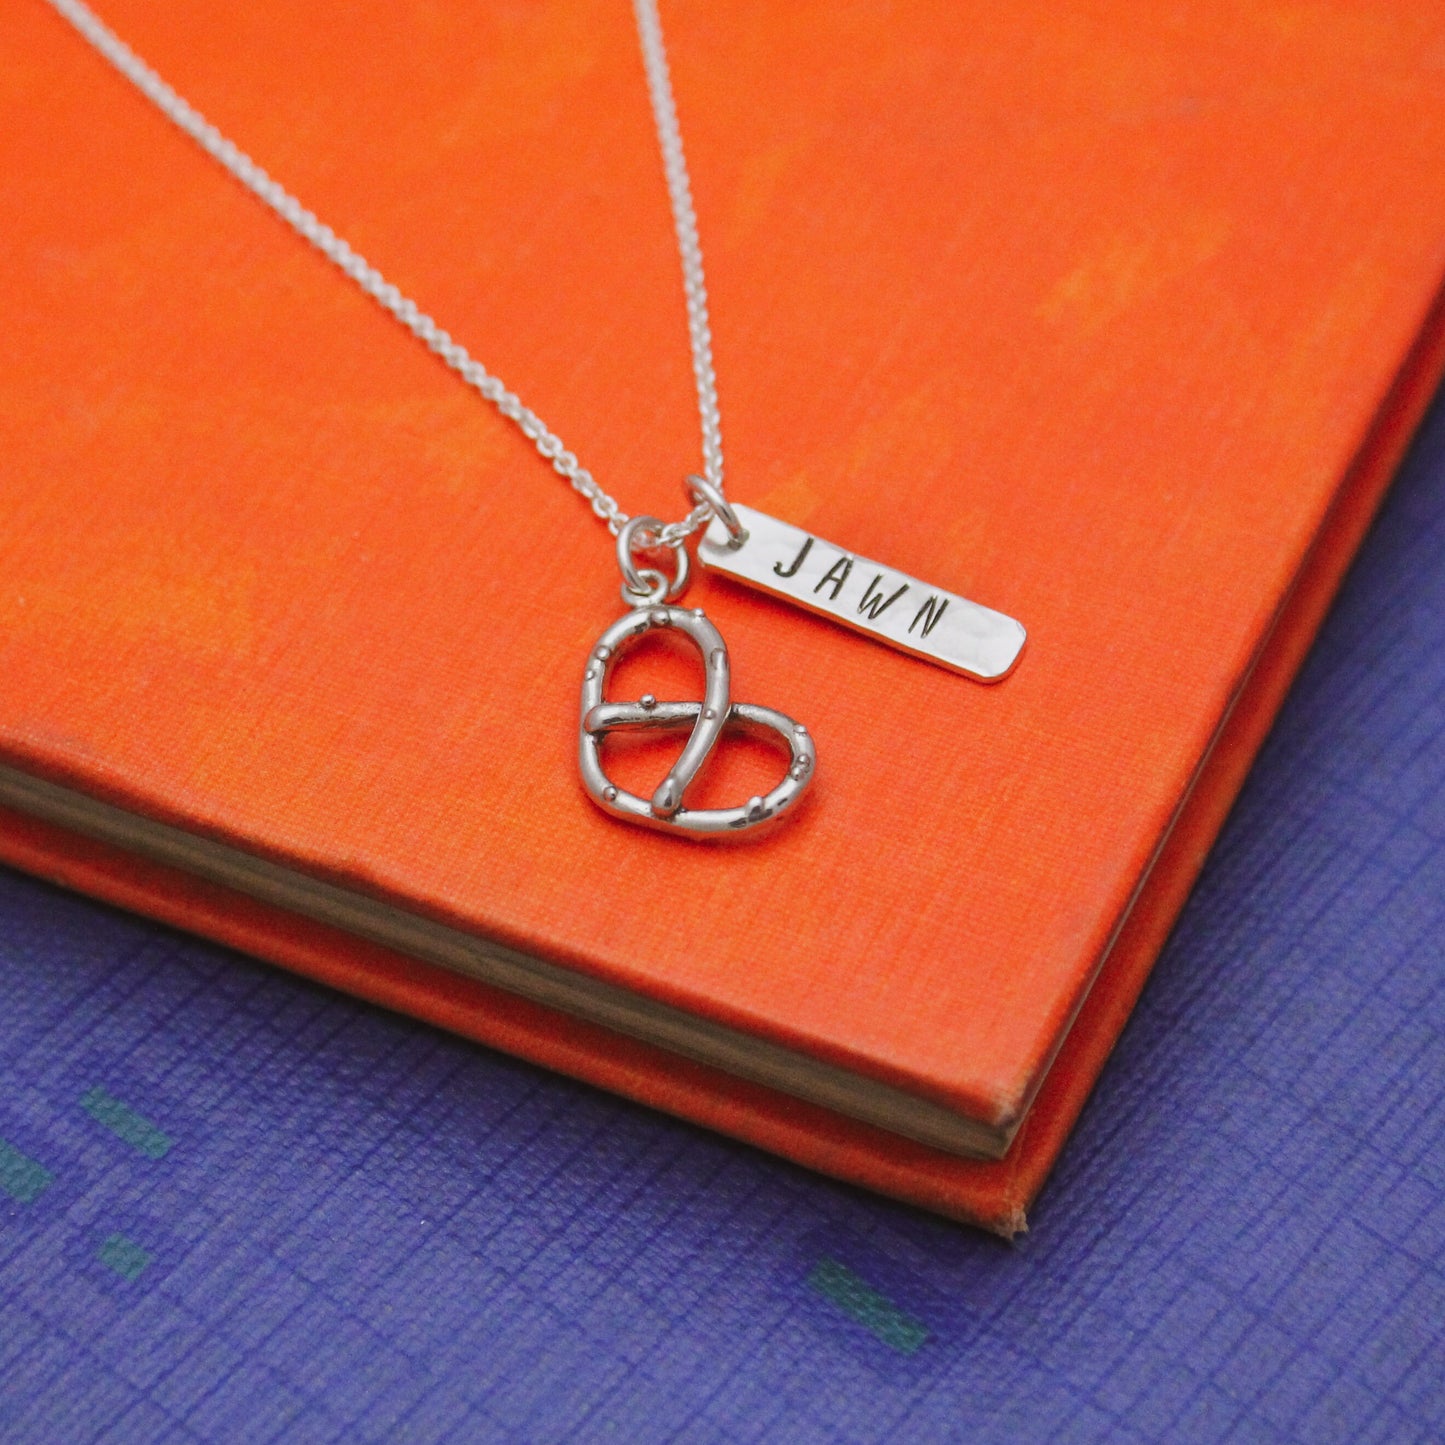 Philly Pretzel Jawn Necklace in Sterling Silver, Philadelphia PA Jewelry